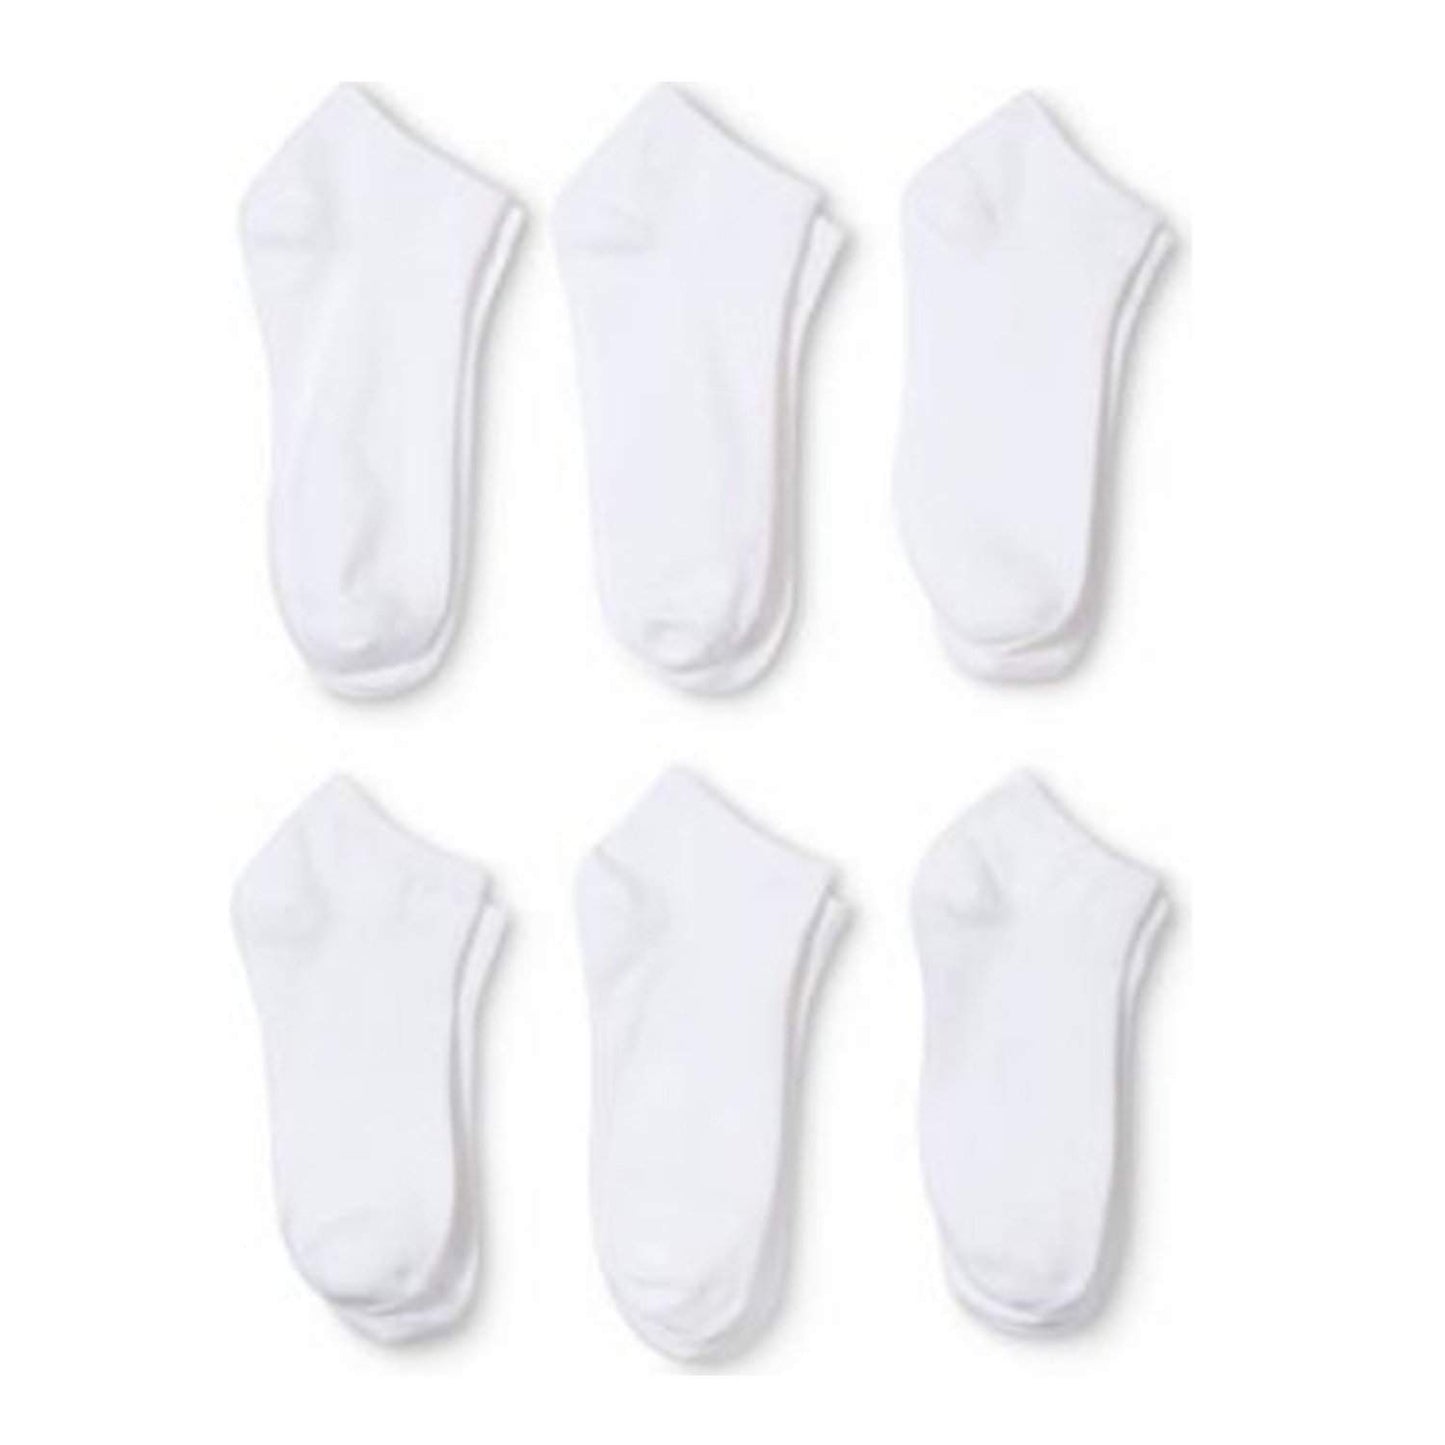 12 Pairs Men's Low Cut Socks 9-11 or 6-8 Black or White or Mixed